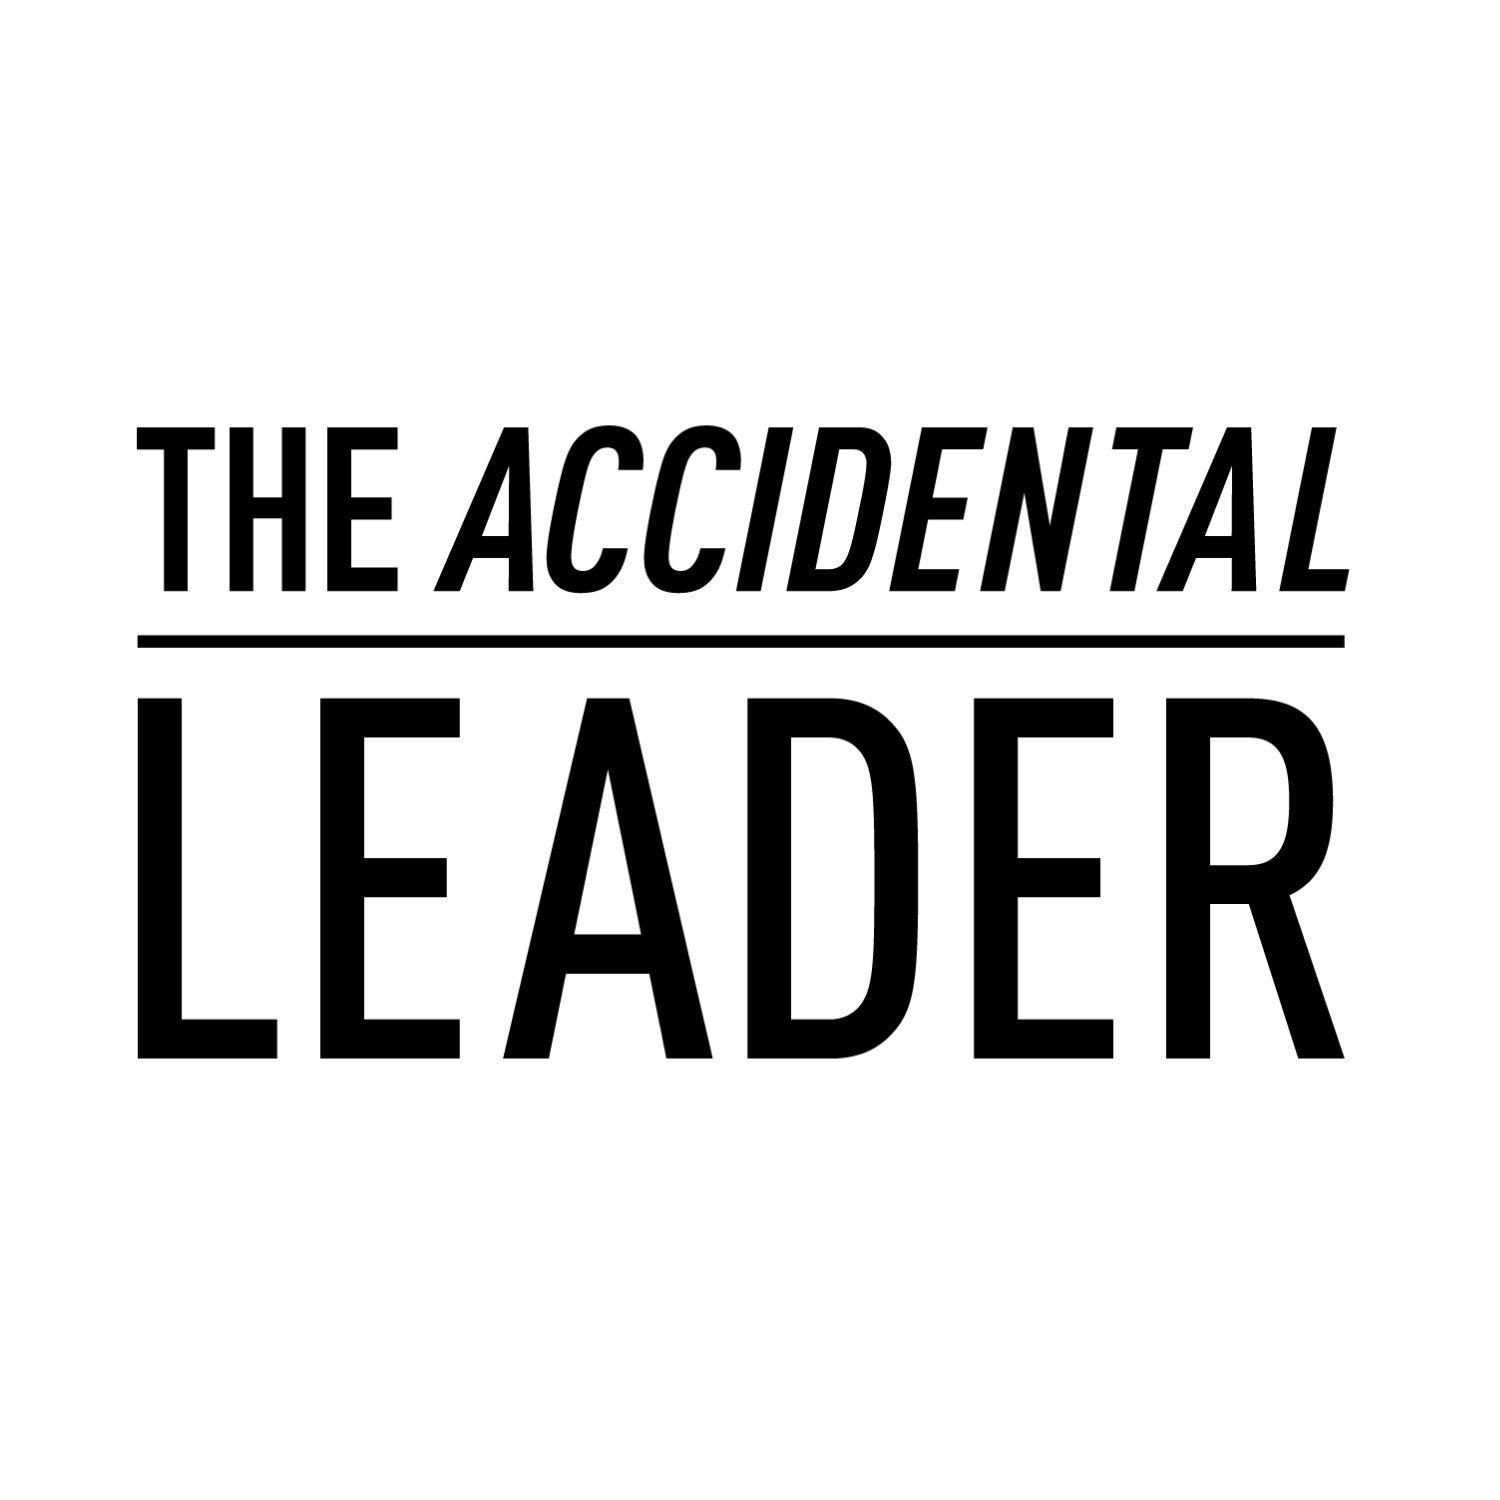 The Accidental Leader